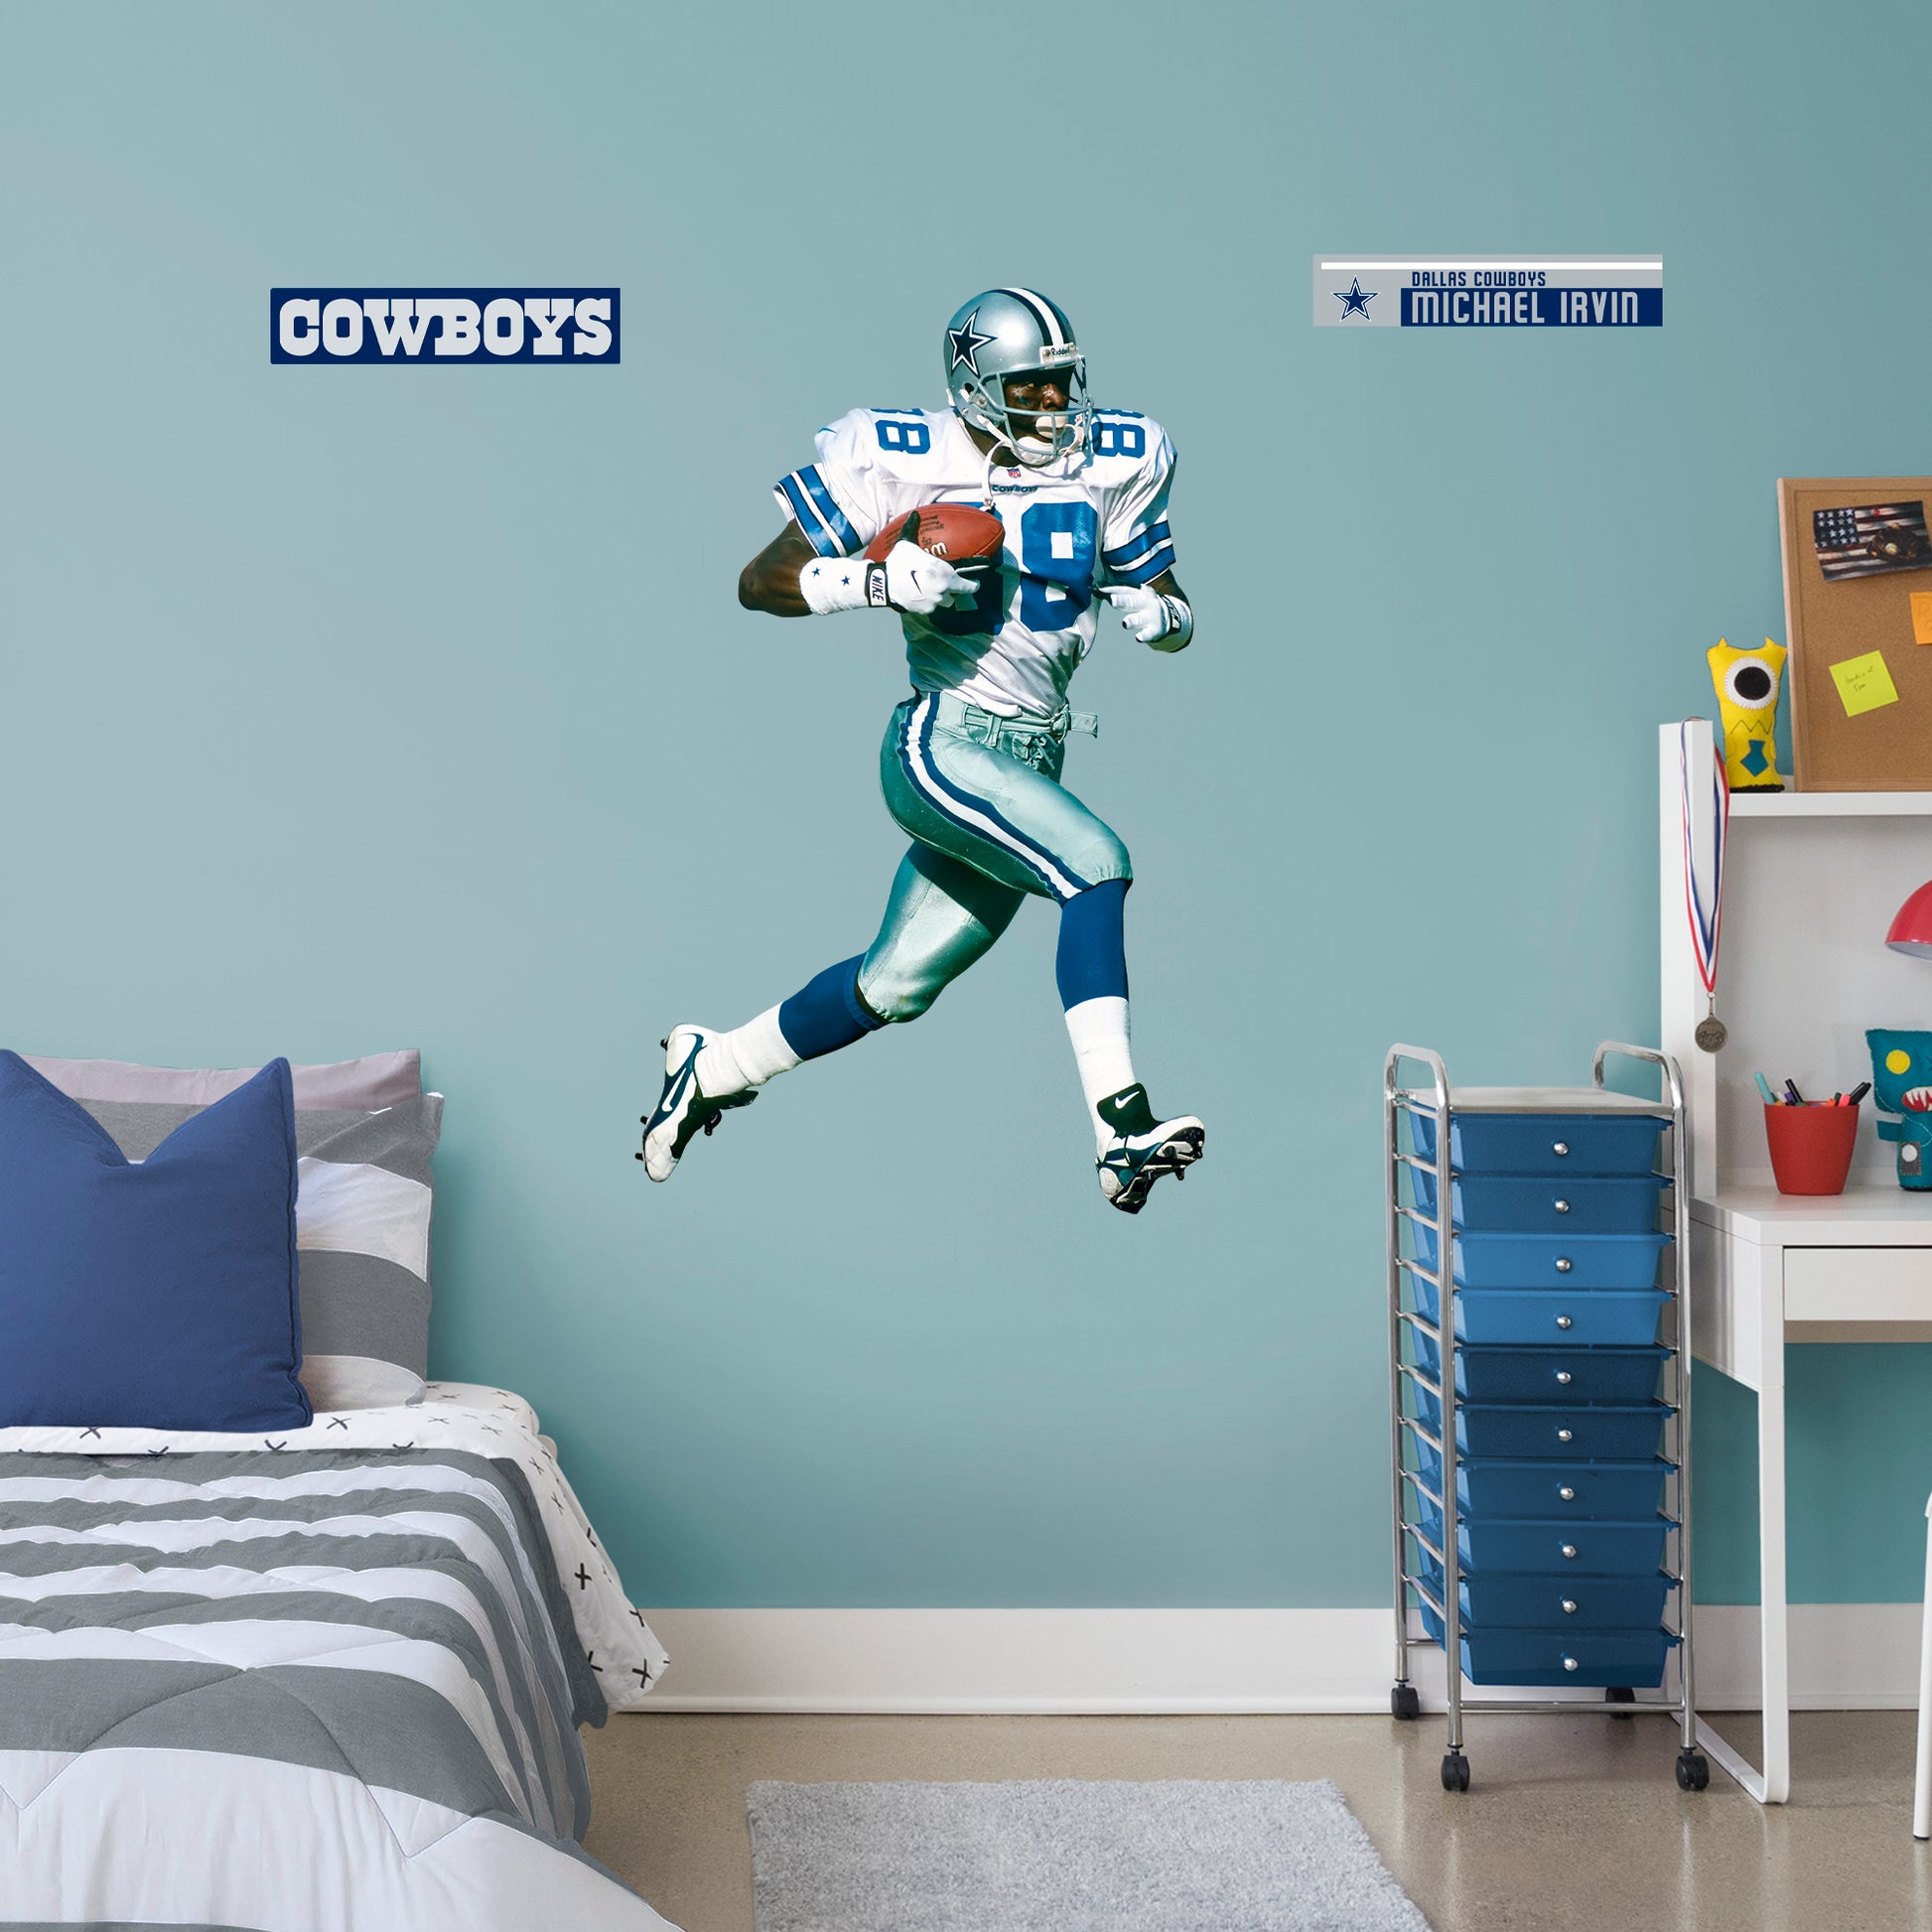 X-Large Athlete + 2 Decals You can show off your love for NFL legend and Hall of Famer Michael Irvin with this high-quality wall decal. Wearing his iconic number 88 Dallas Cowboys jersey, this decal shows off The Playmaker leaving defenders in the dust! Luckily, you won't have to worry about trying to tackle Irvin yourself - this wall decal can be easily applied and removed from almost any surface. How 'bout them Cowboys?!